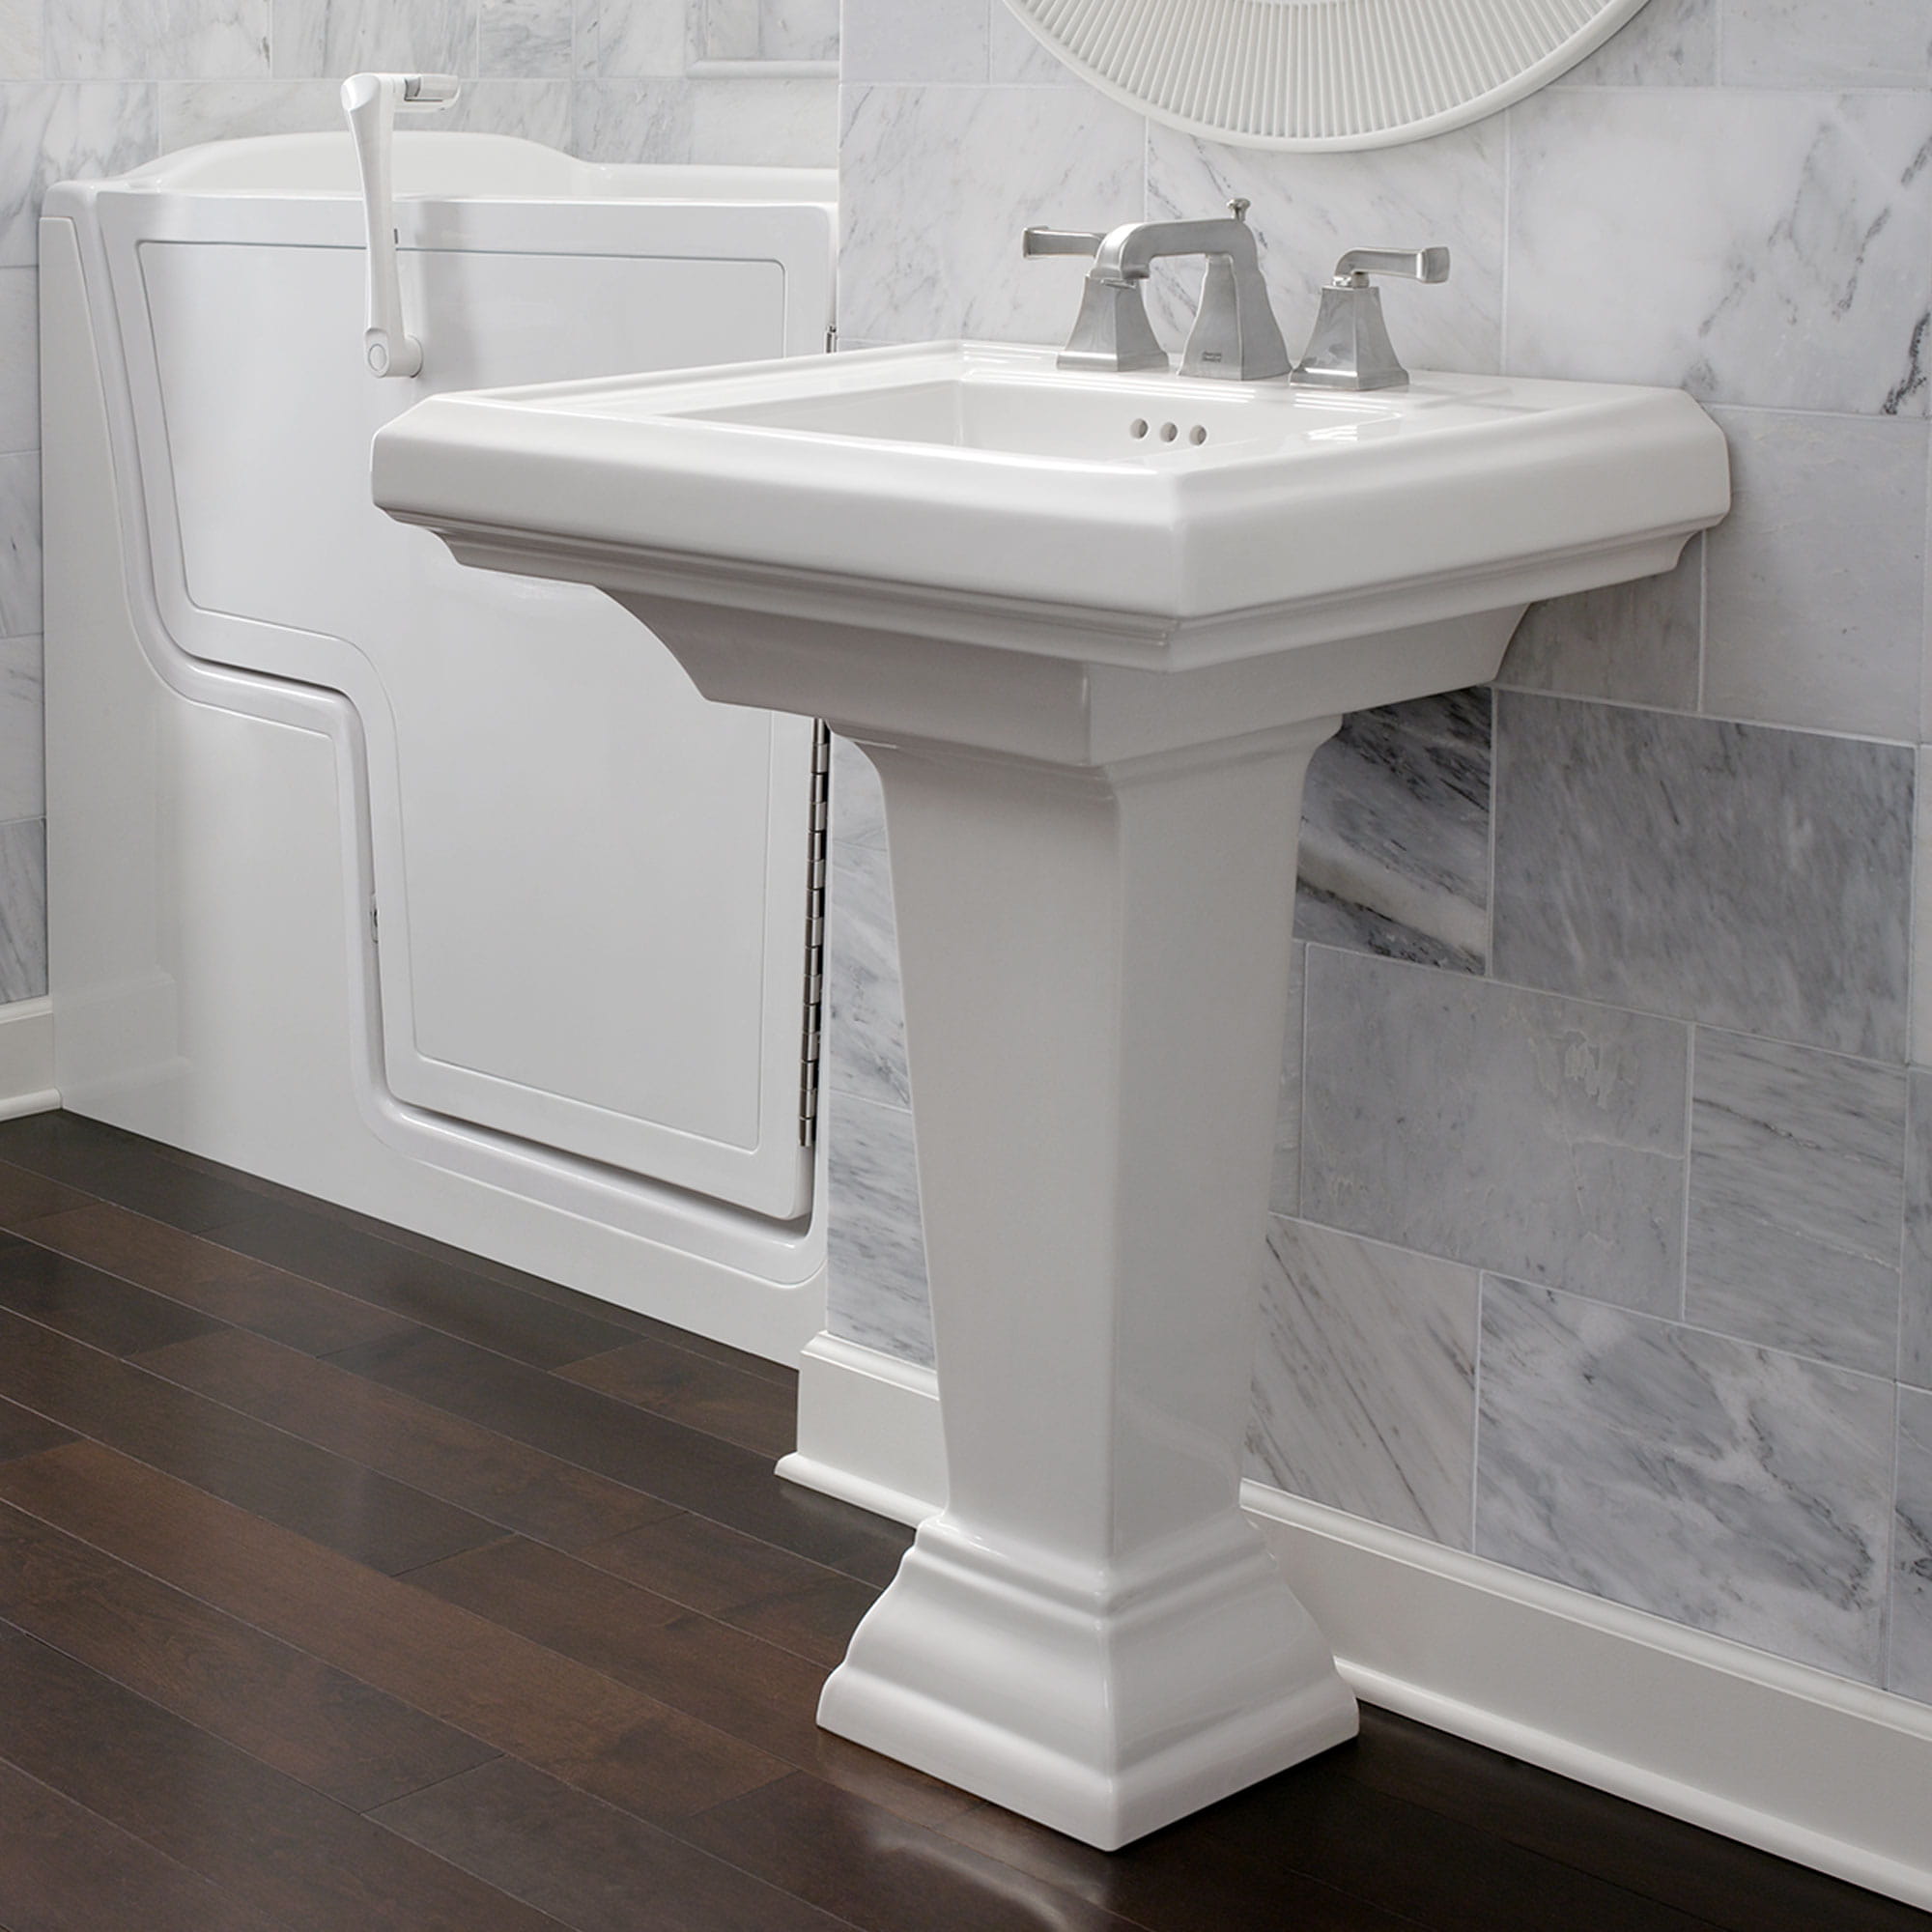 Town Square 27 in Pedestal Sink Top 8 in Centers WHITE